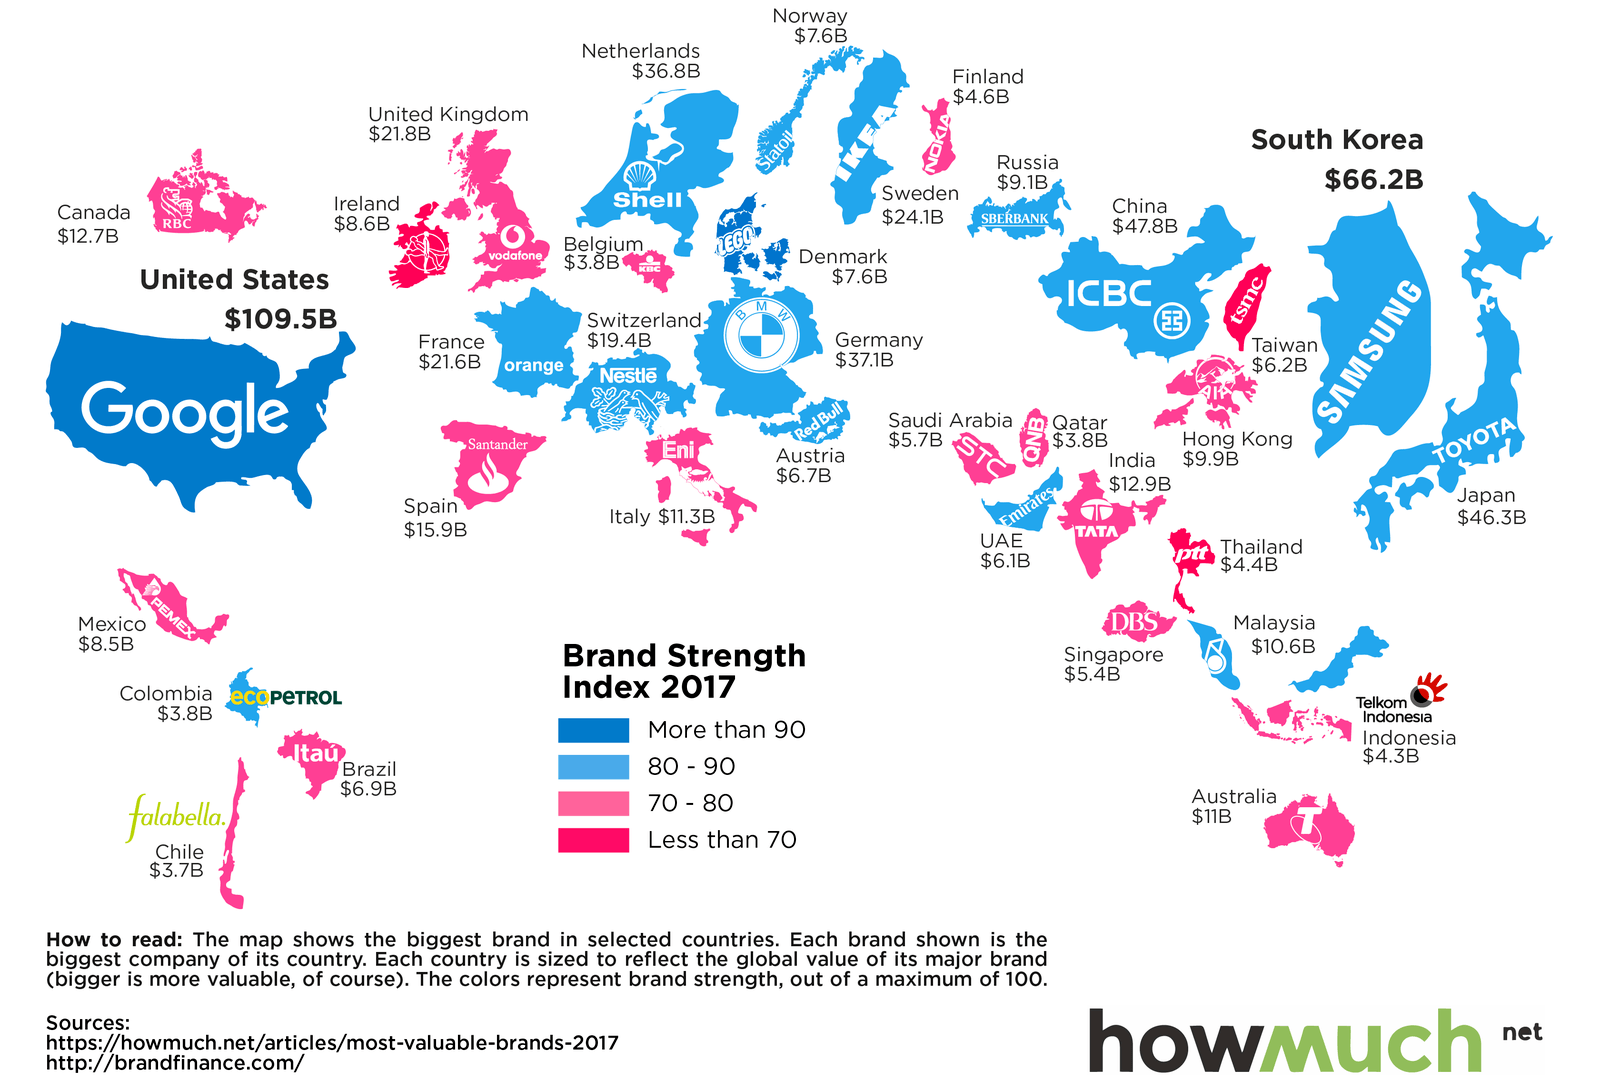 This Map Shows the Most Valuable Brand for Each Country